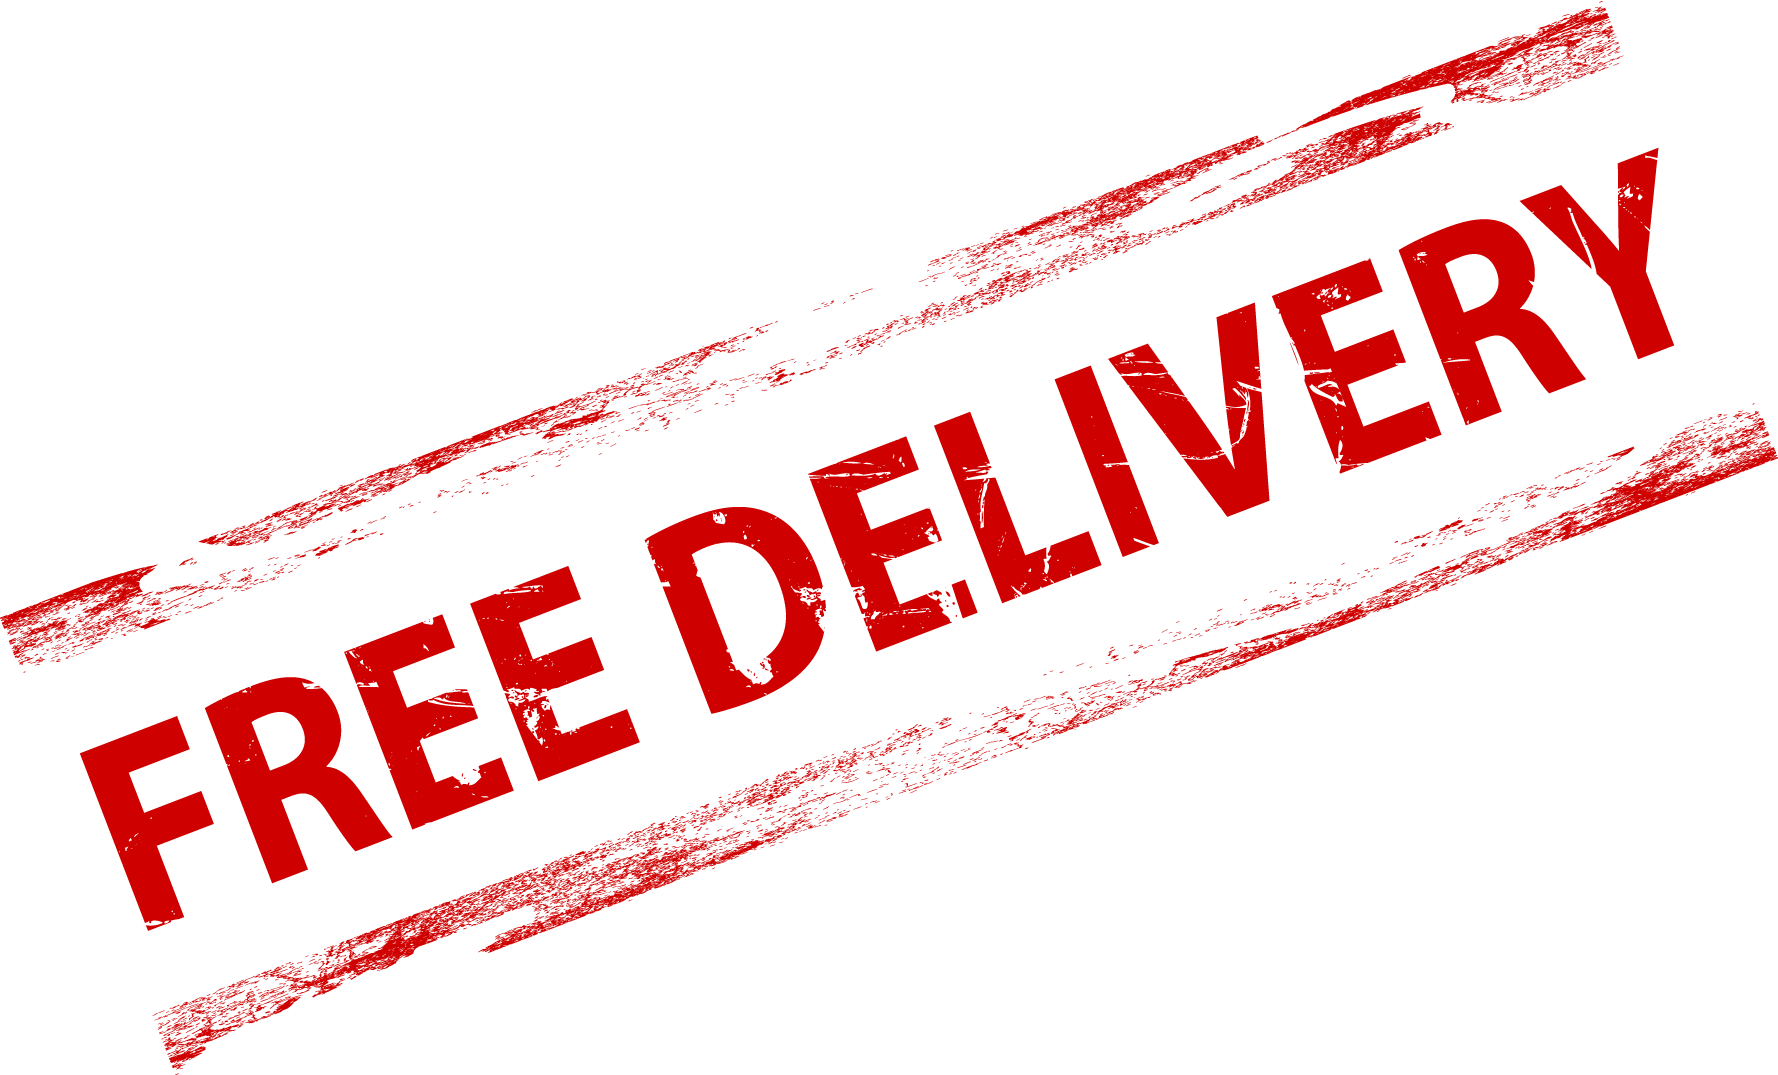 Free Delivery This Weekend (1778x1075)